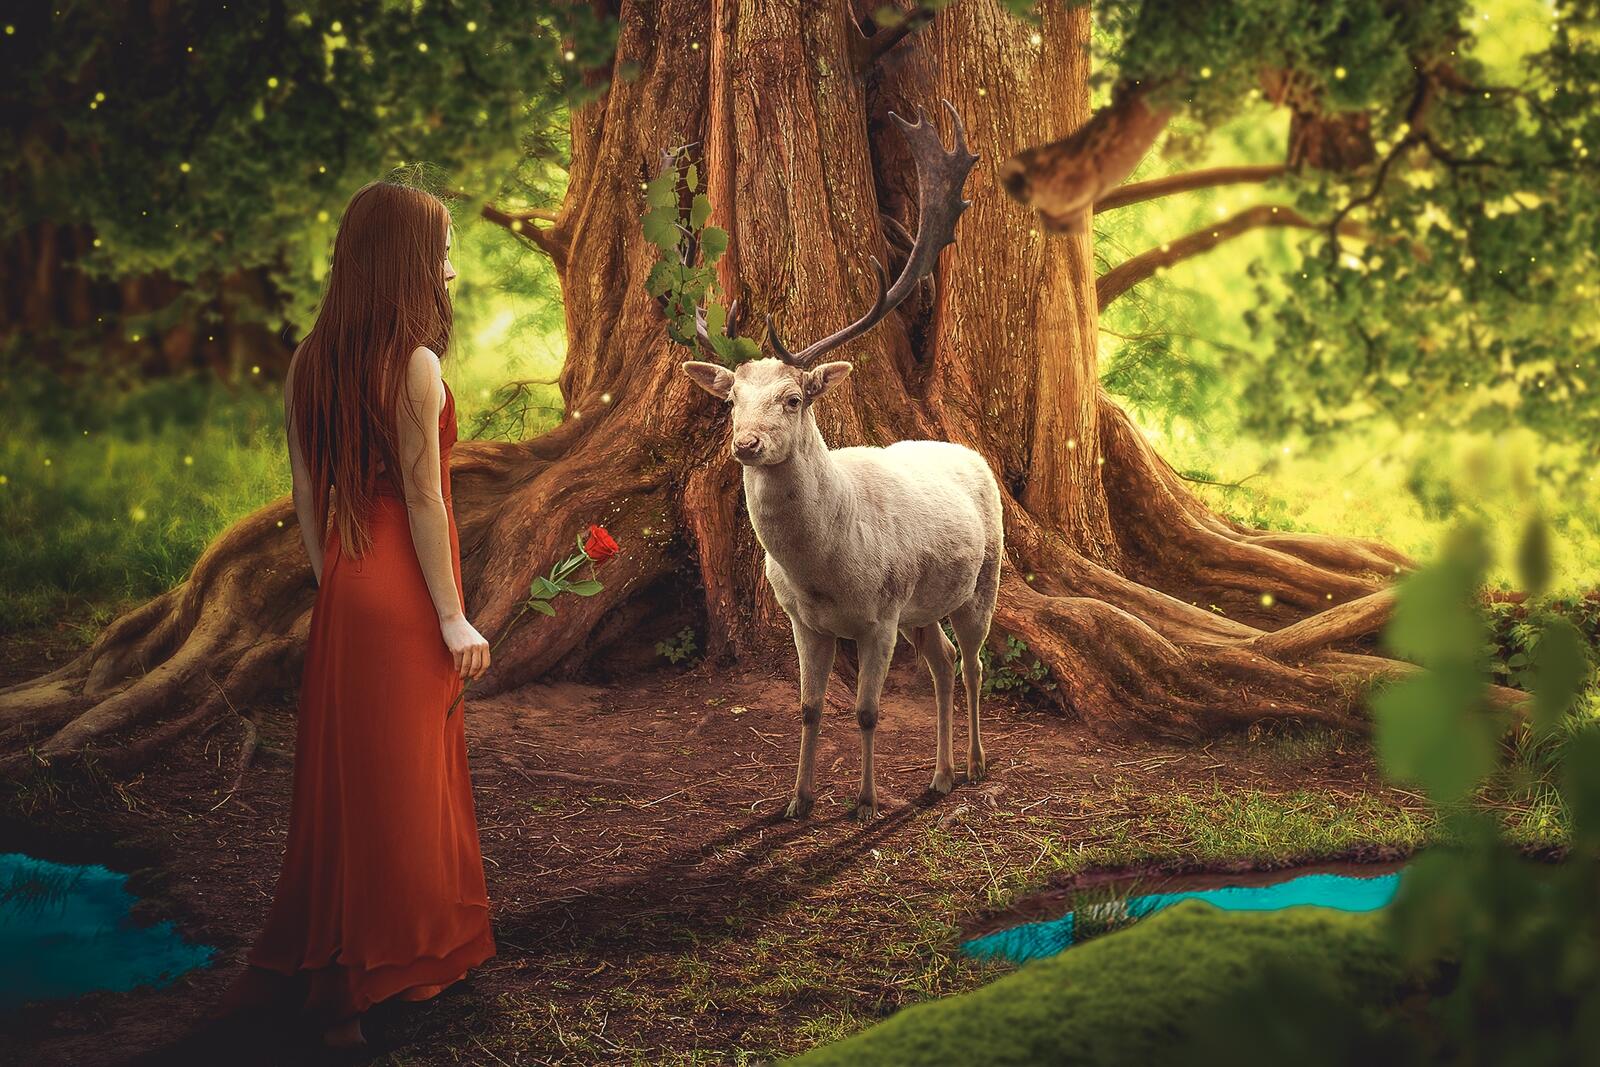 Wallpapers fairy forest the girl with the rose the deer on the desktop